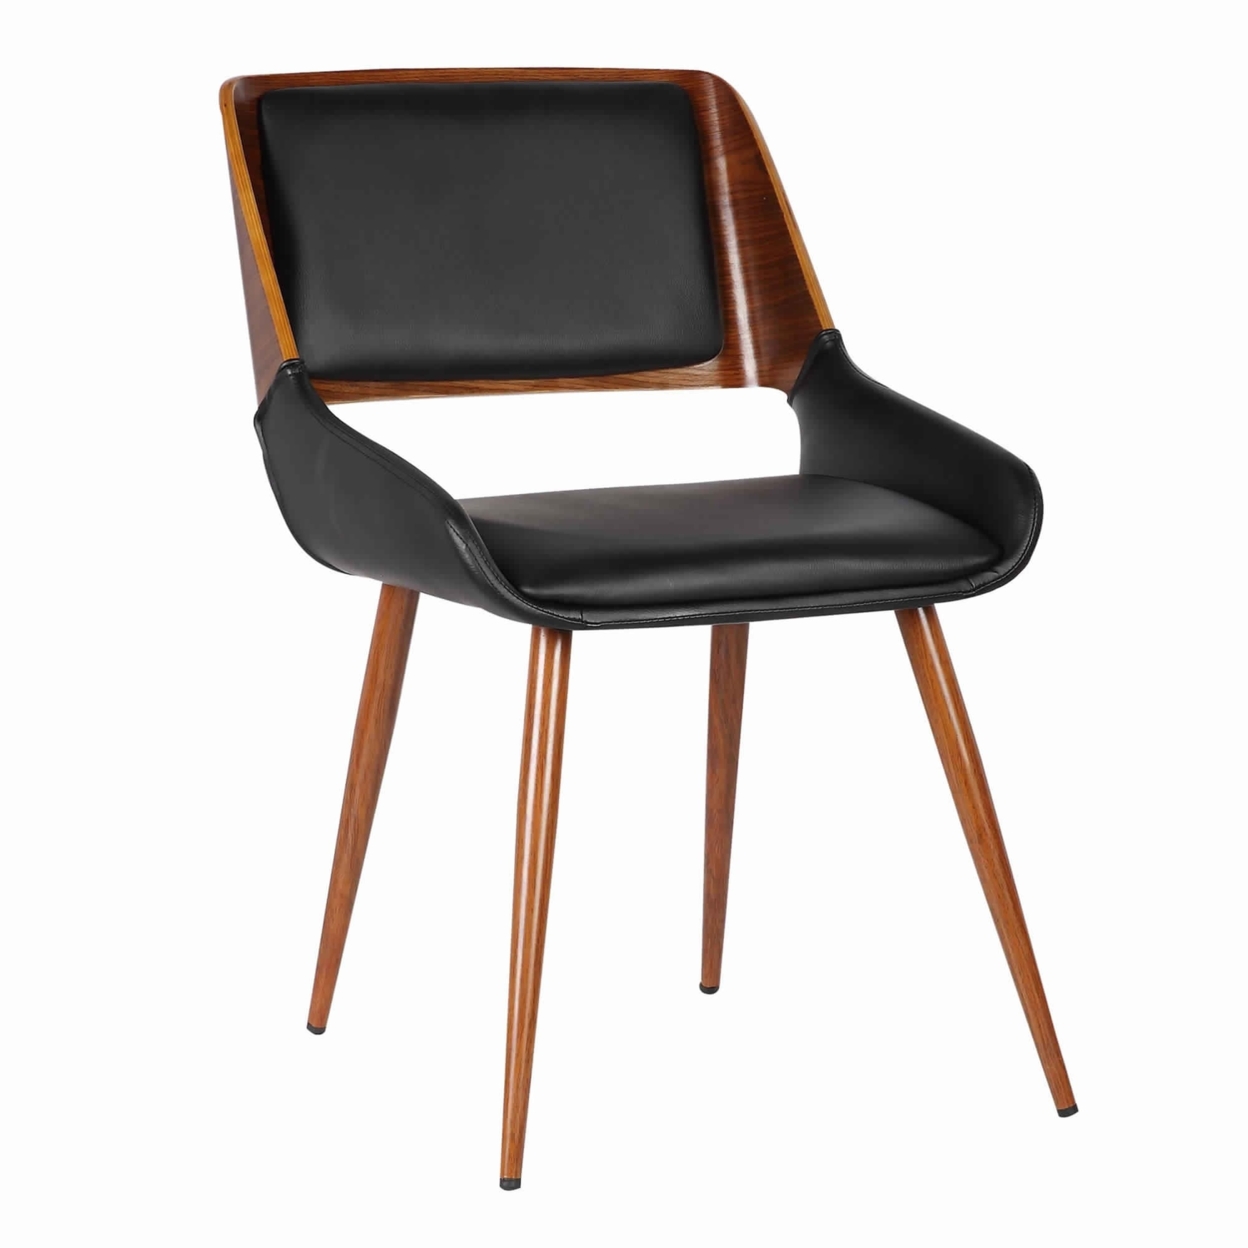 Leatherette Mid Century Dining Chair With Split Padded Back, Black And Brown- Saltoro Sherpi